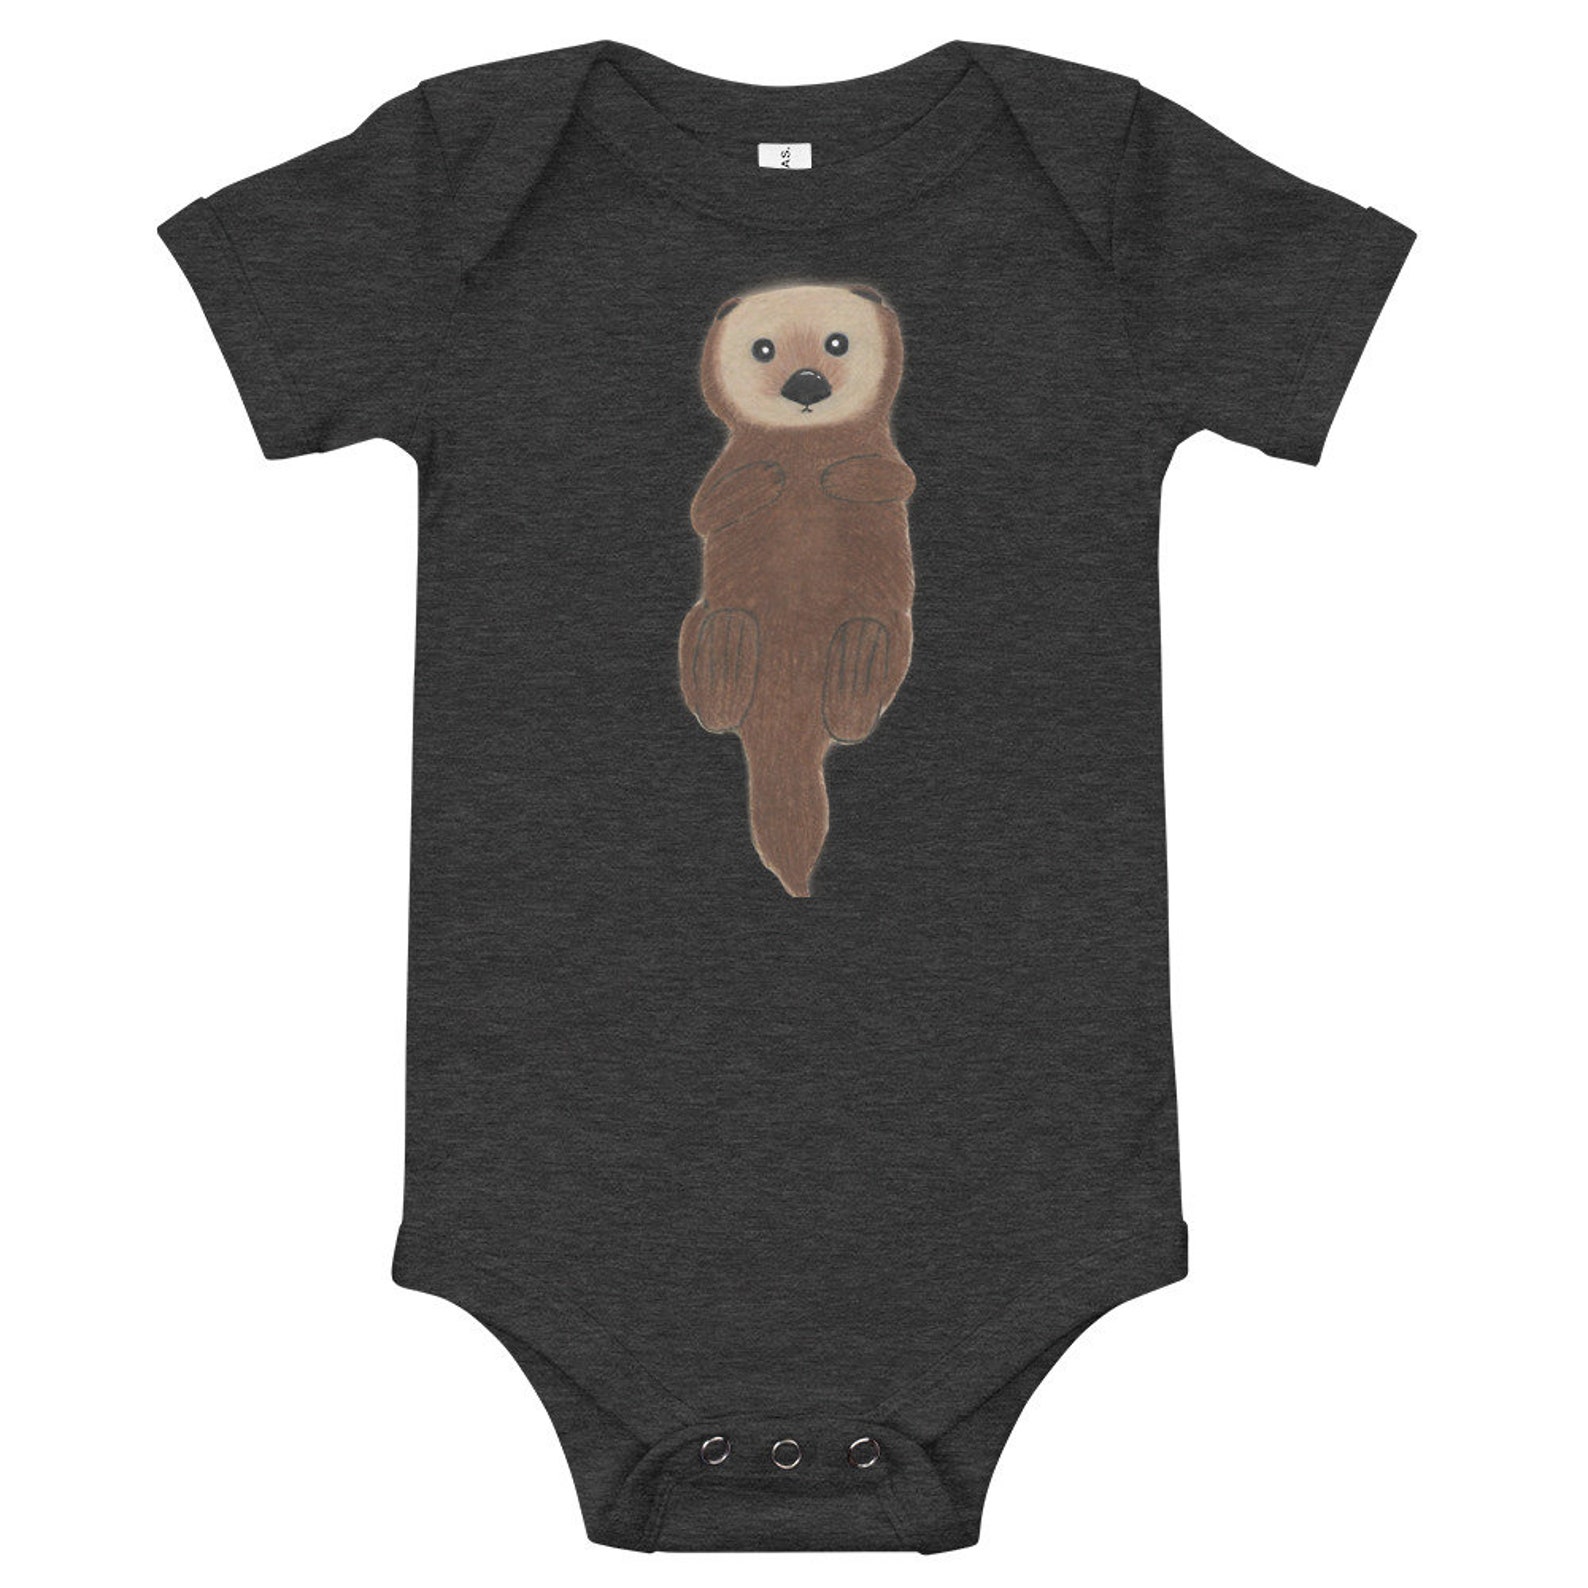 The Wee Otter Baby Onesie | Etsy